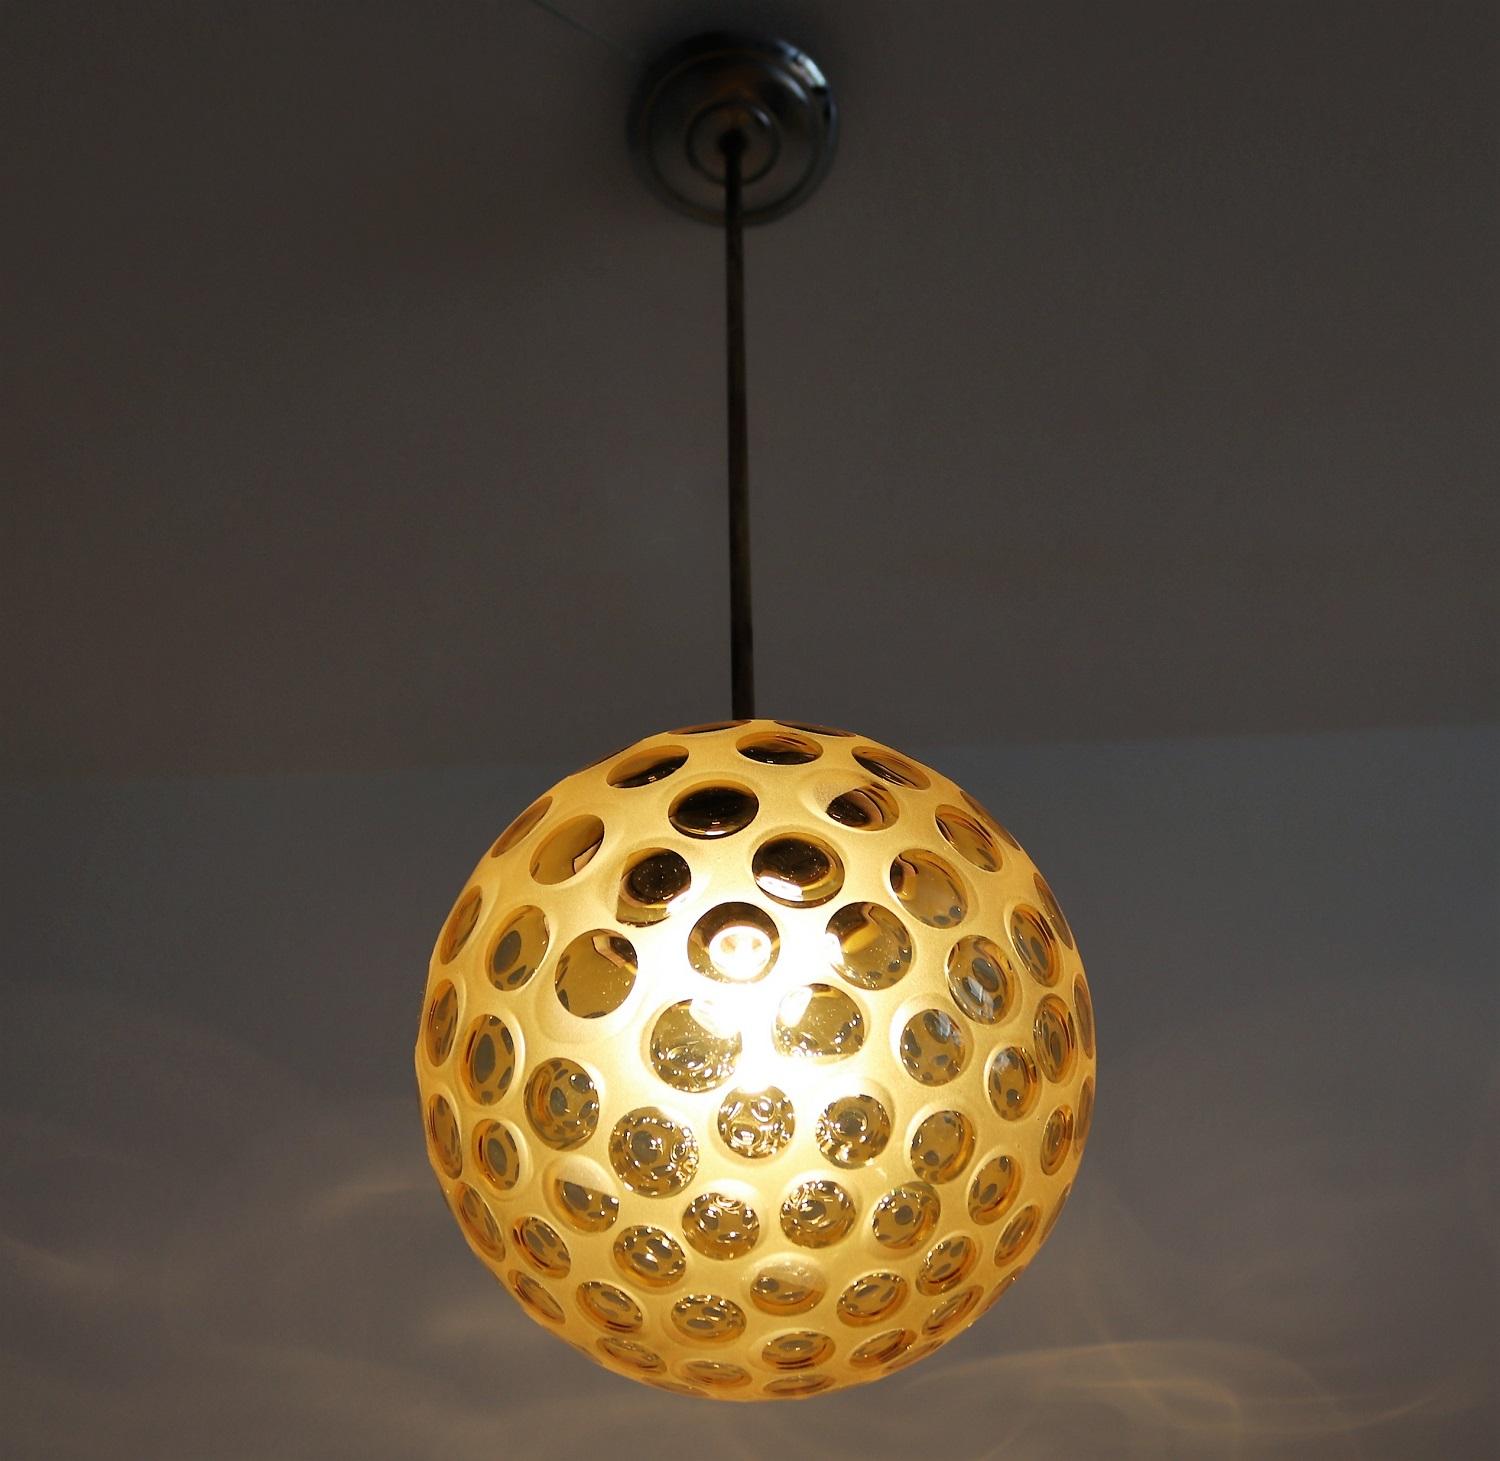 Gorgeous small pendant lamp with beautiful frosted cut glass sphere and metal details.
Made in Italy, 1940s
The amber-yellow glass is cut with many round windows within the glass sphere and makes beautiful reflects when illuminated.
All parts are